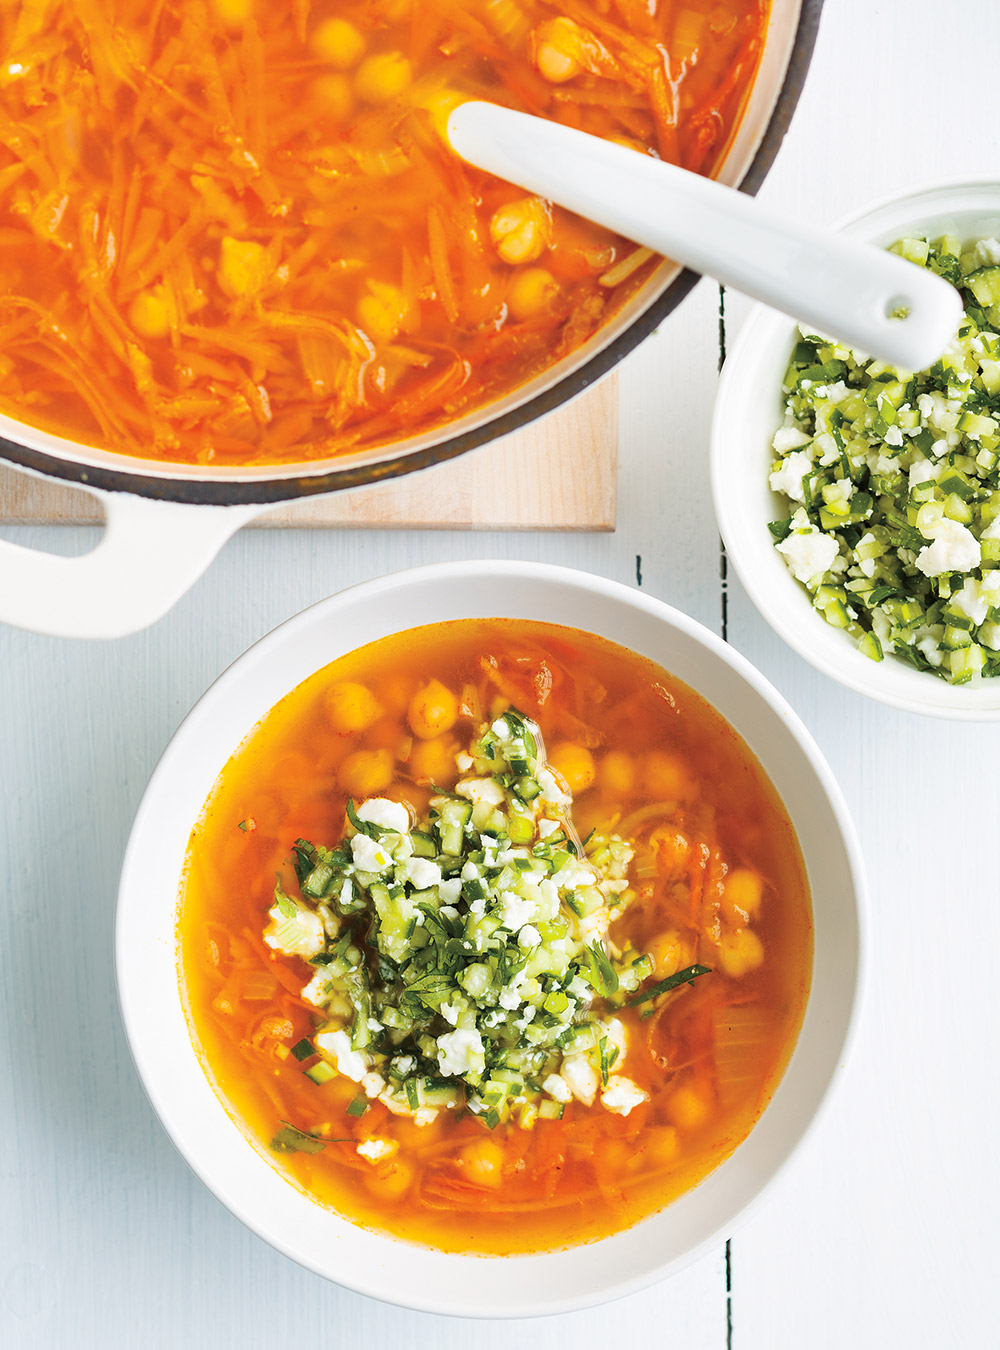 Chickpea and Root Vegetable Soup